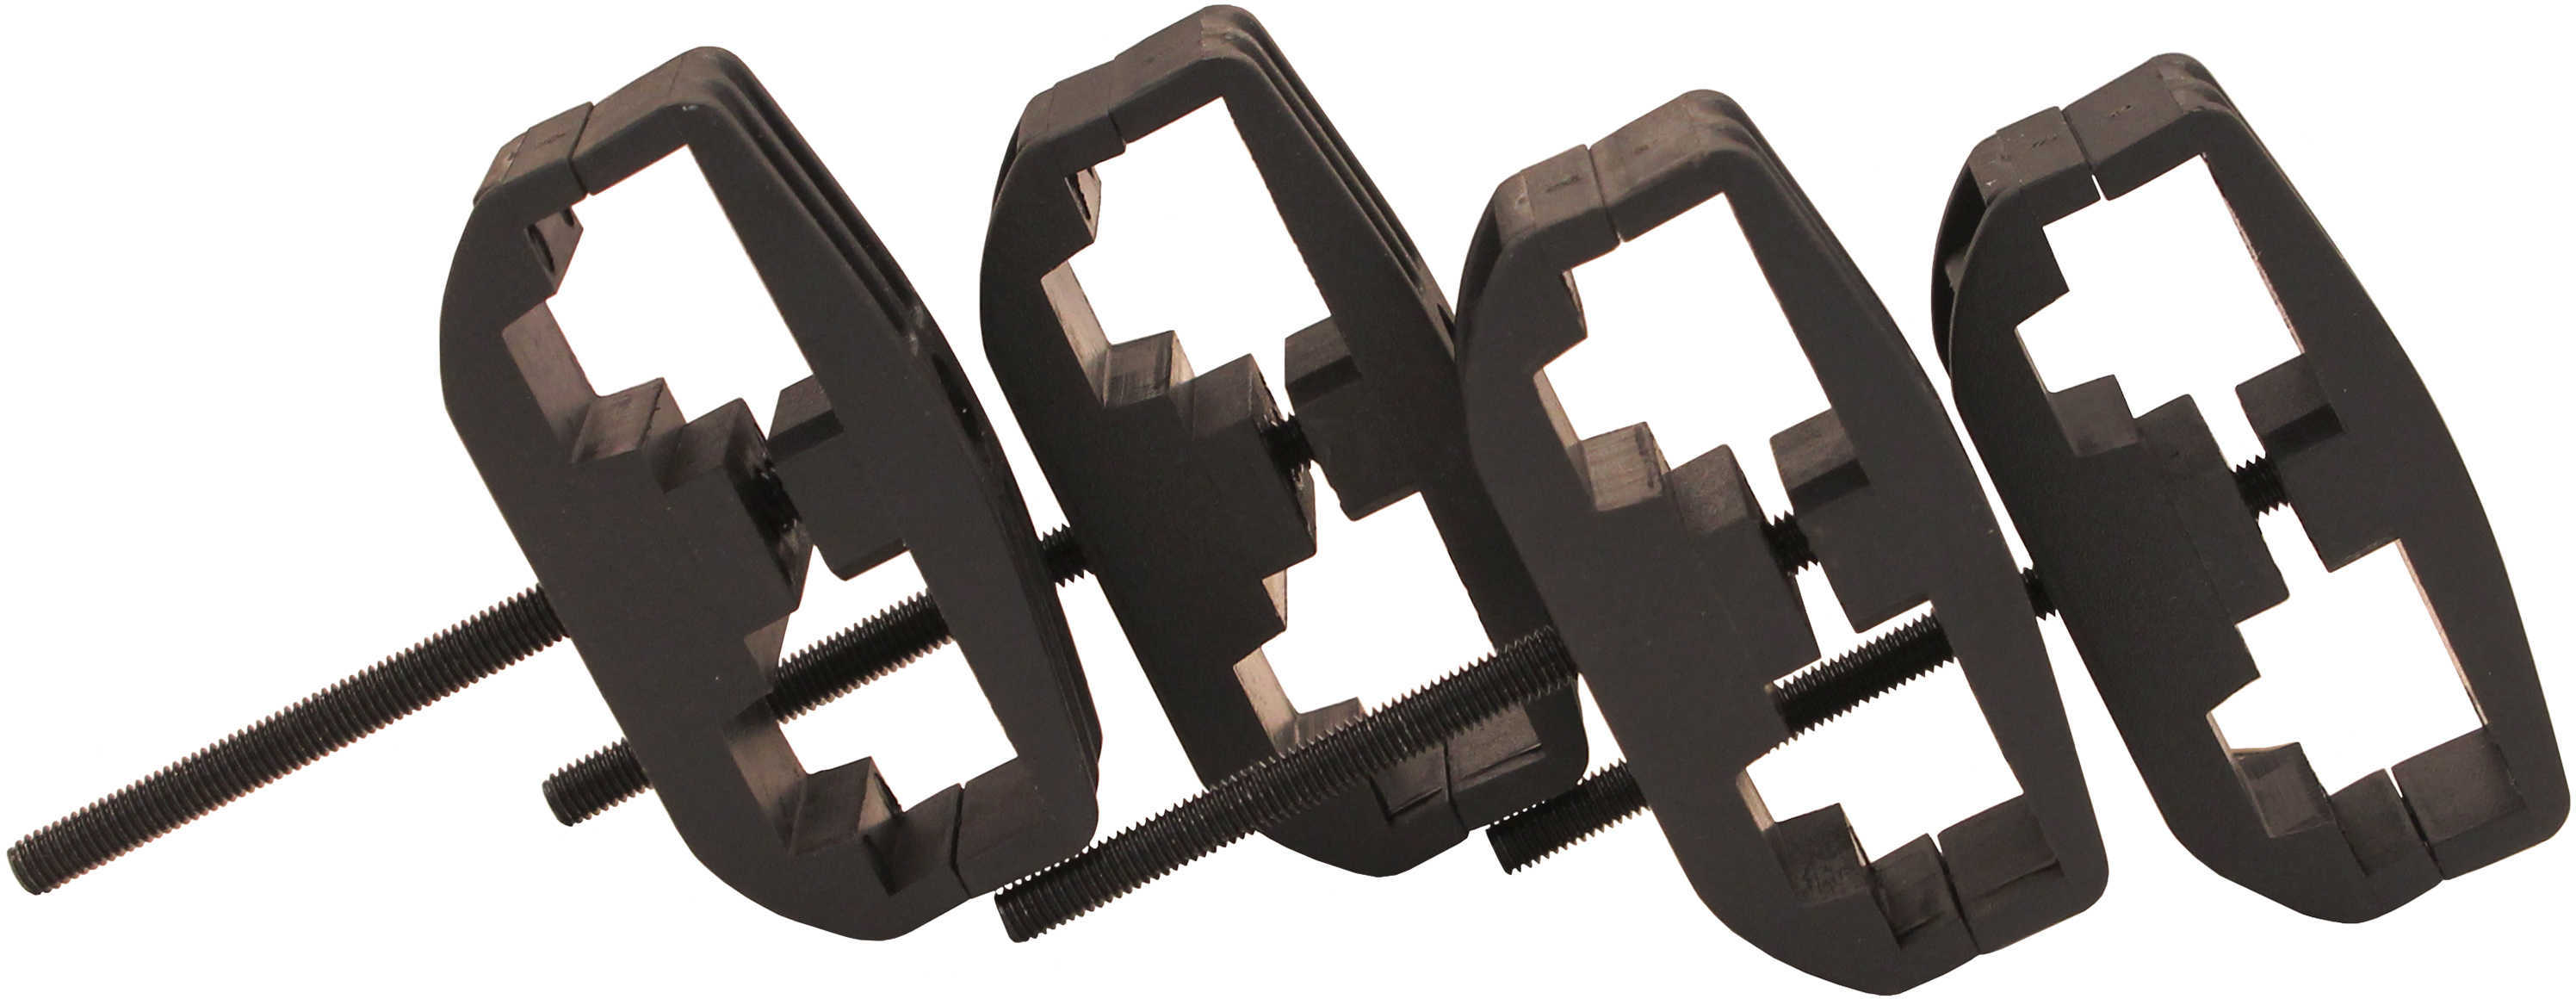 AR-15 Accessories AR-15 Mag Clamp 4-Pack Md: Pm016B